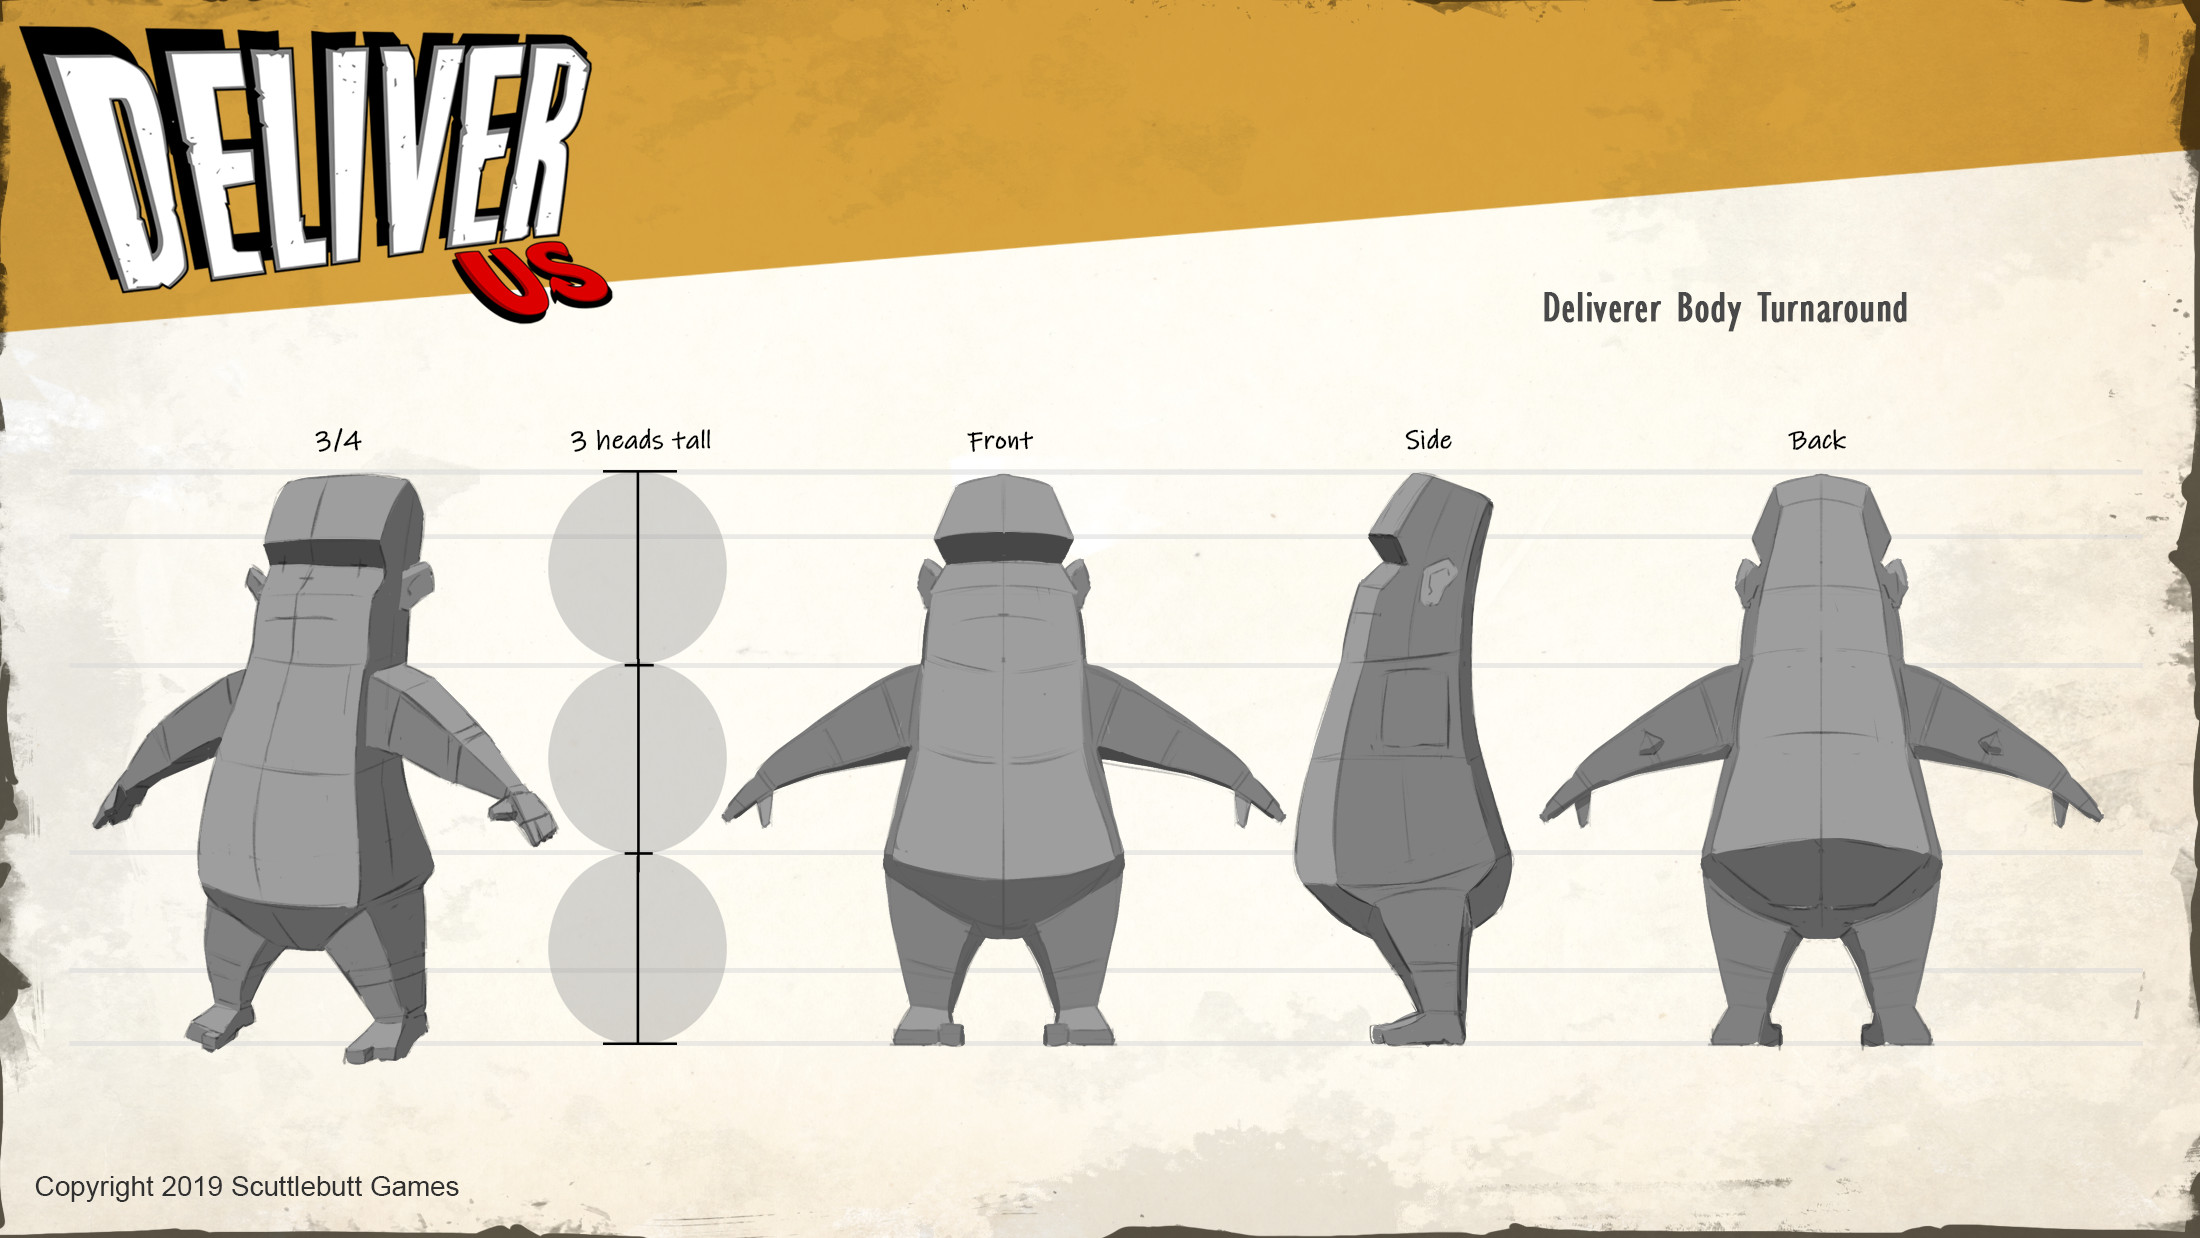 We had planned to make a bunch of different deliverer types so I had to streamline the body a bit to be "one size fits all". 